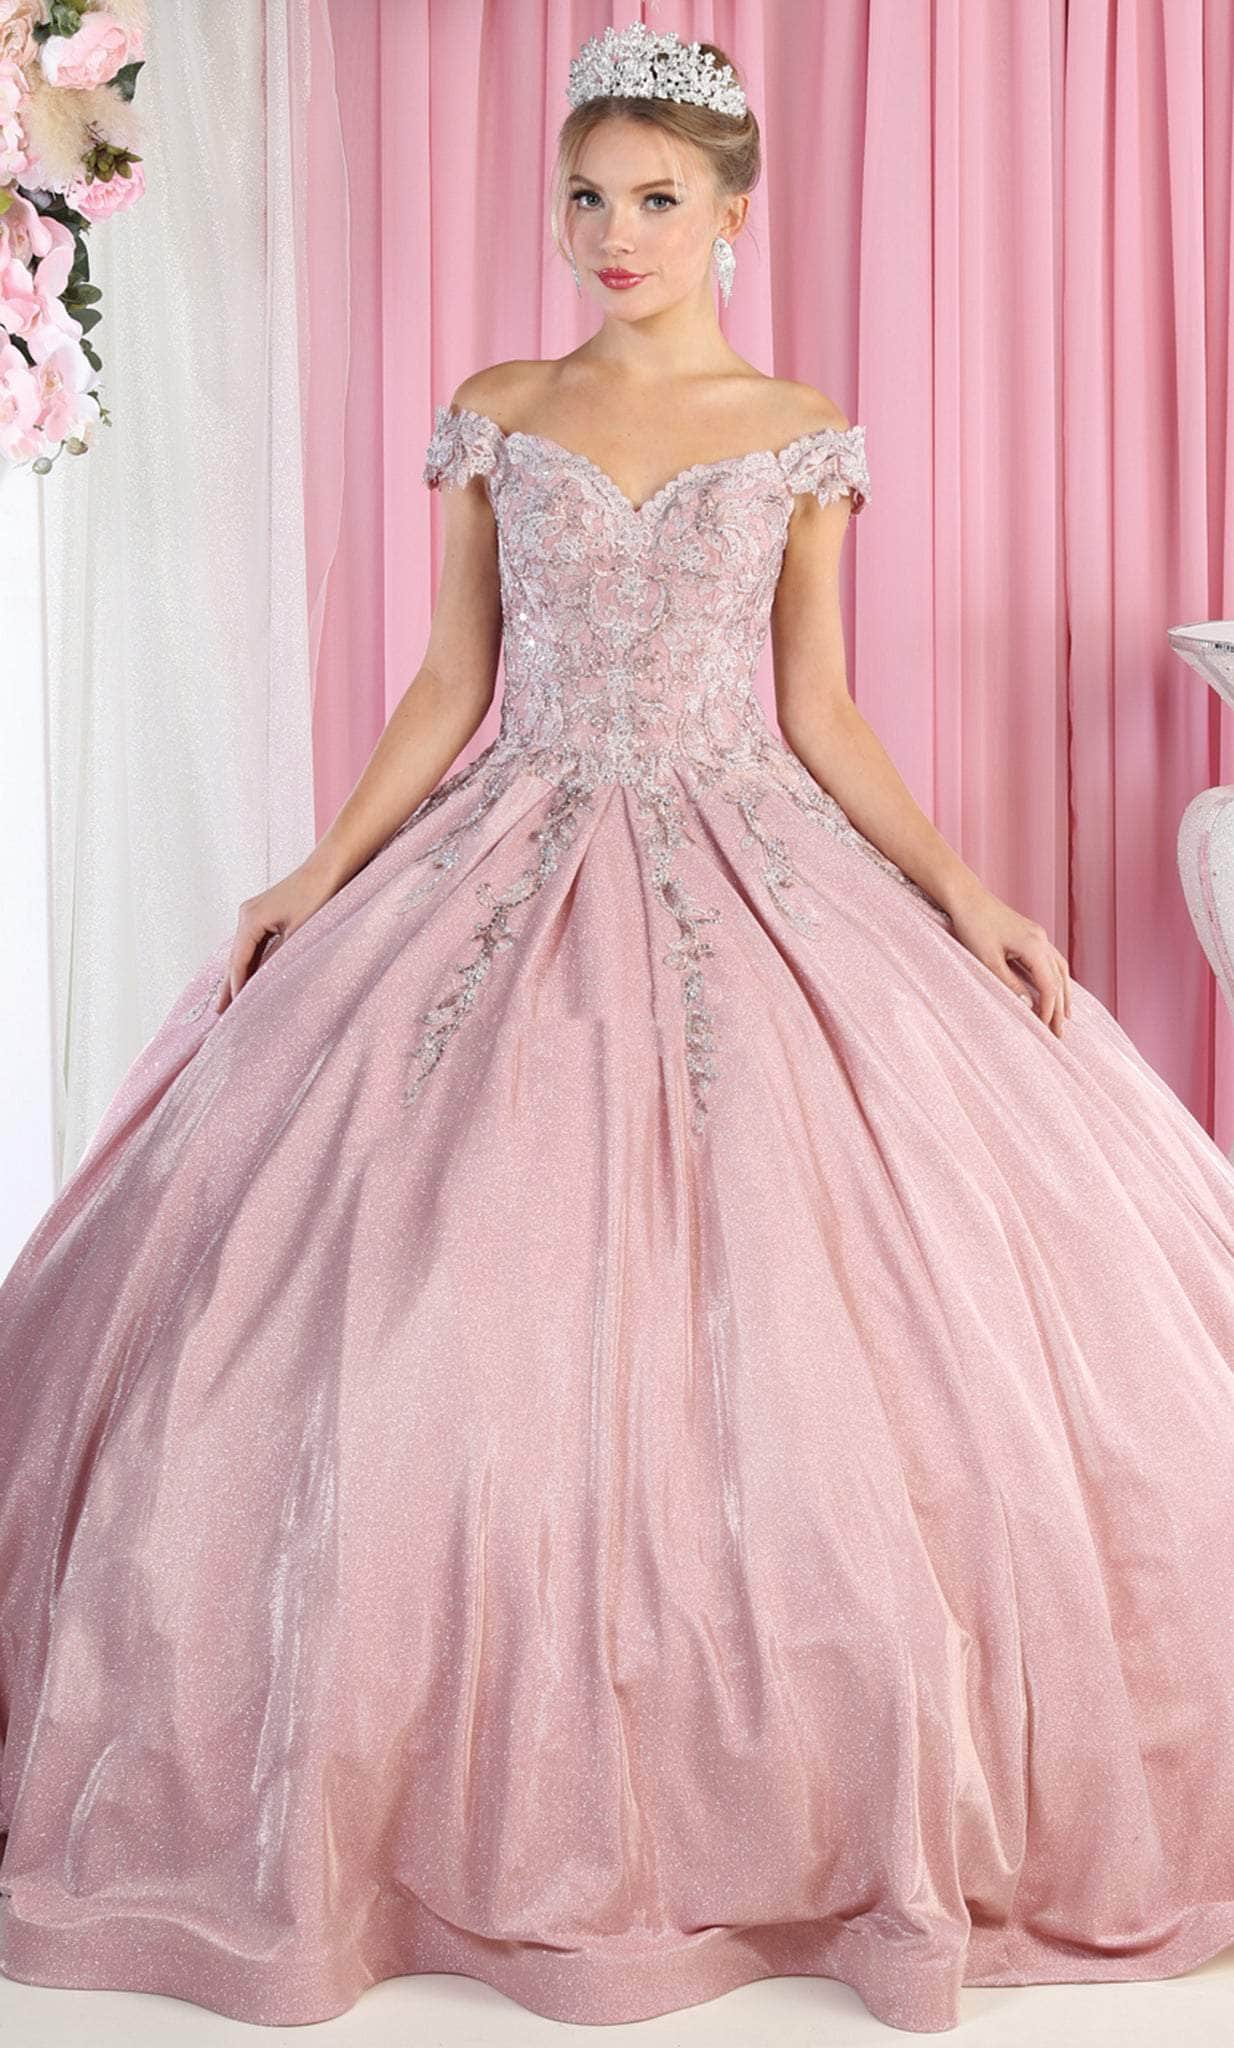 May Queen LK178 - Lace Detailed Quinceanera Ballgown Quinceanera Dresses 4 / Dusty Rose